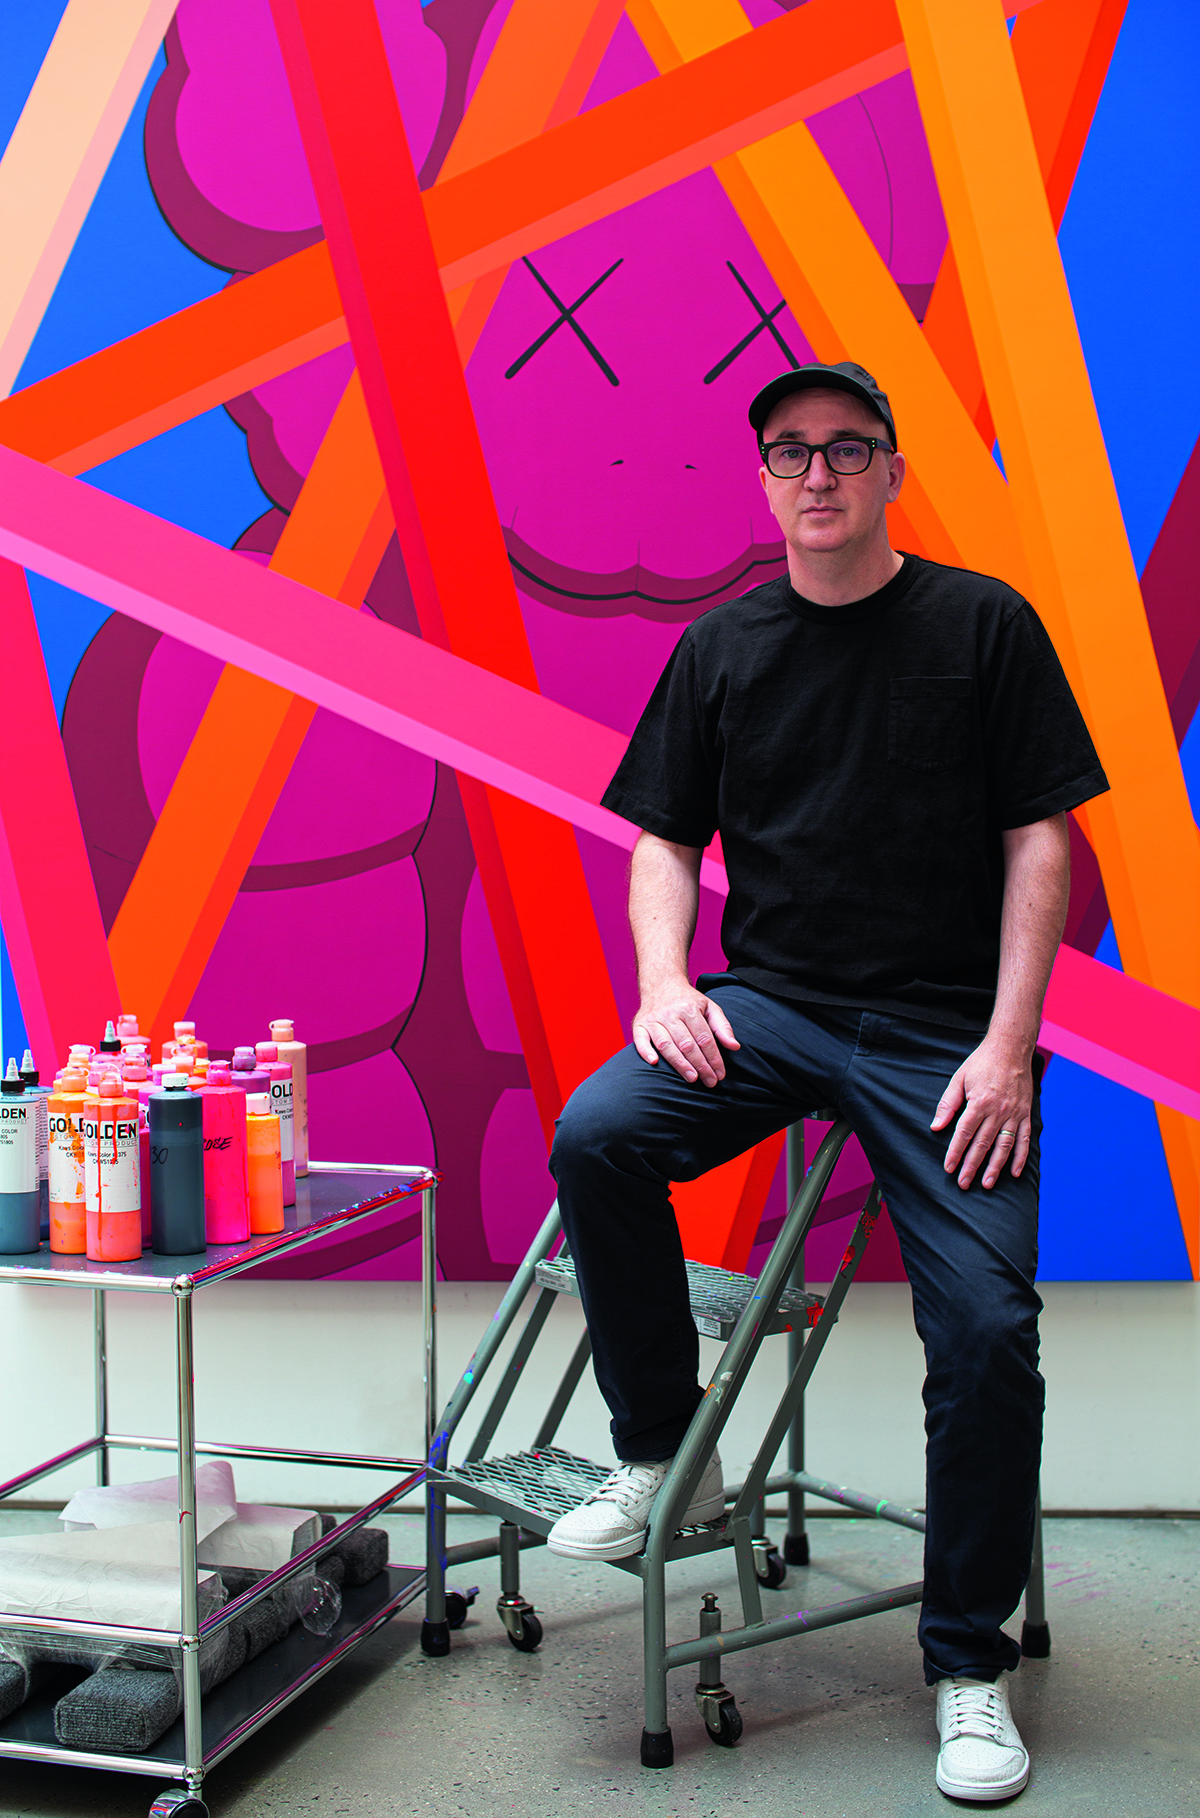 A man sitting on a stool next to his paints and a colourful wall